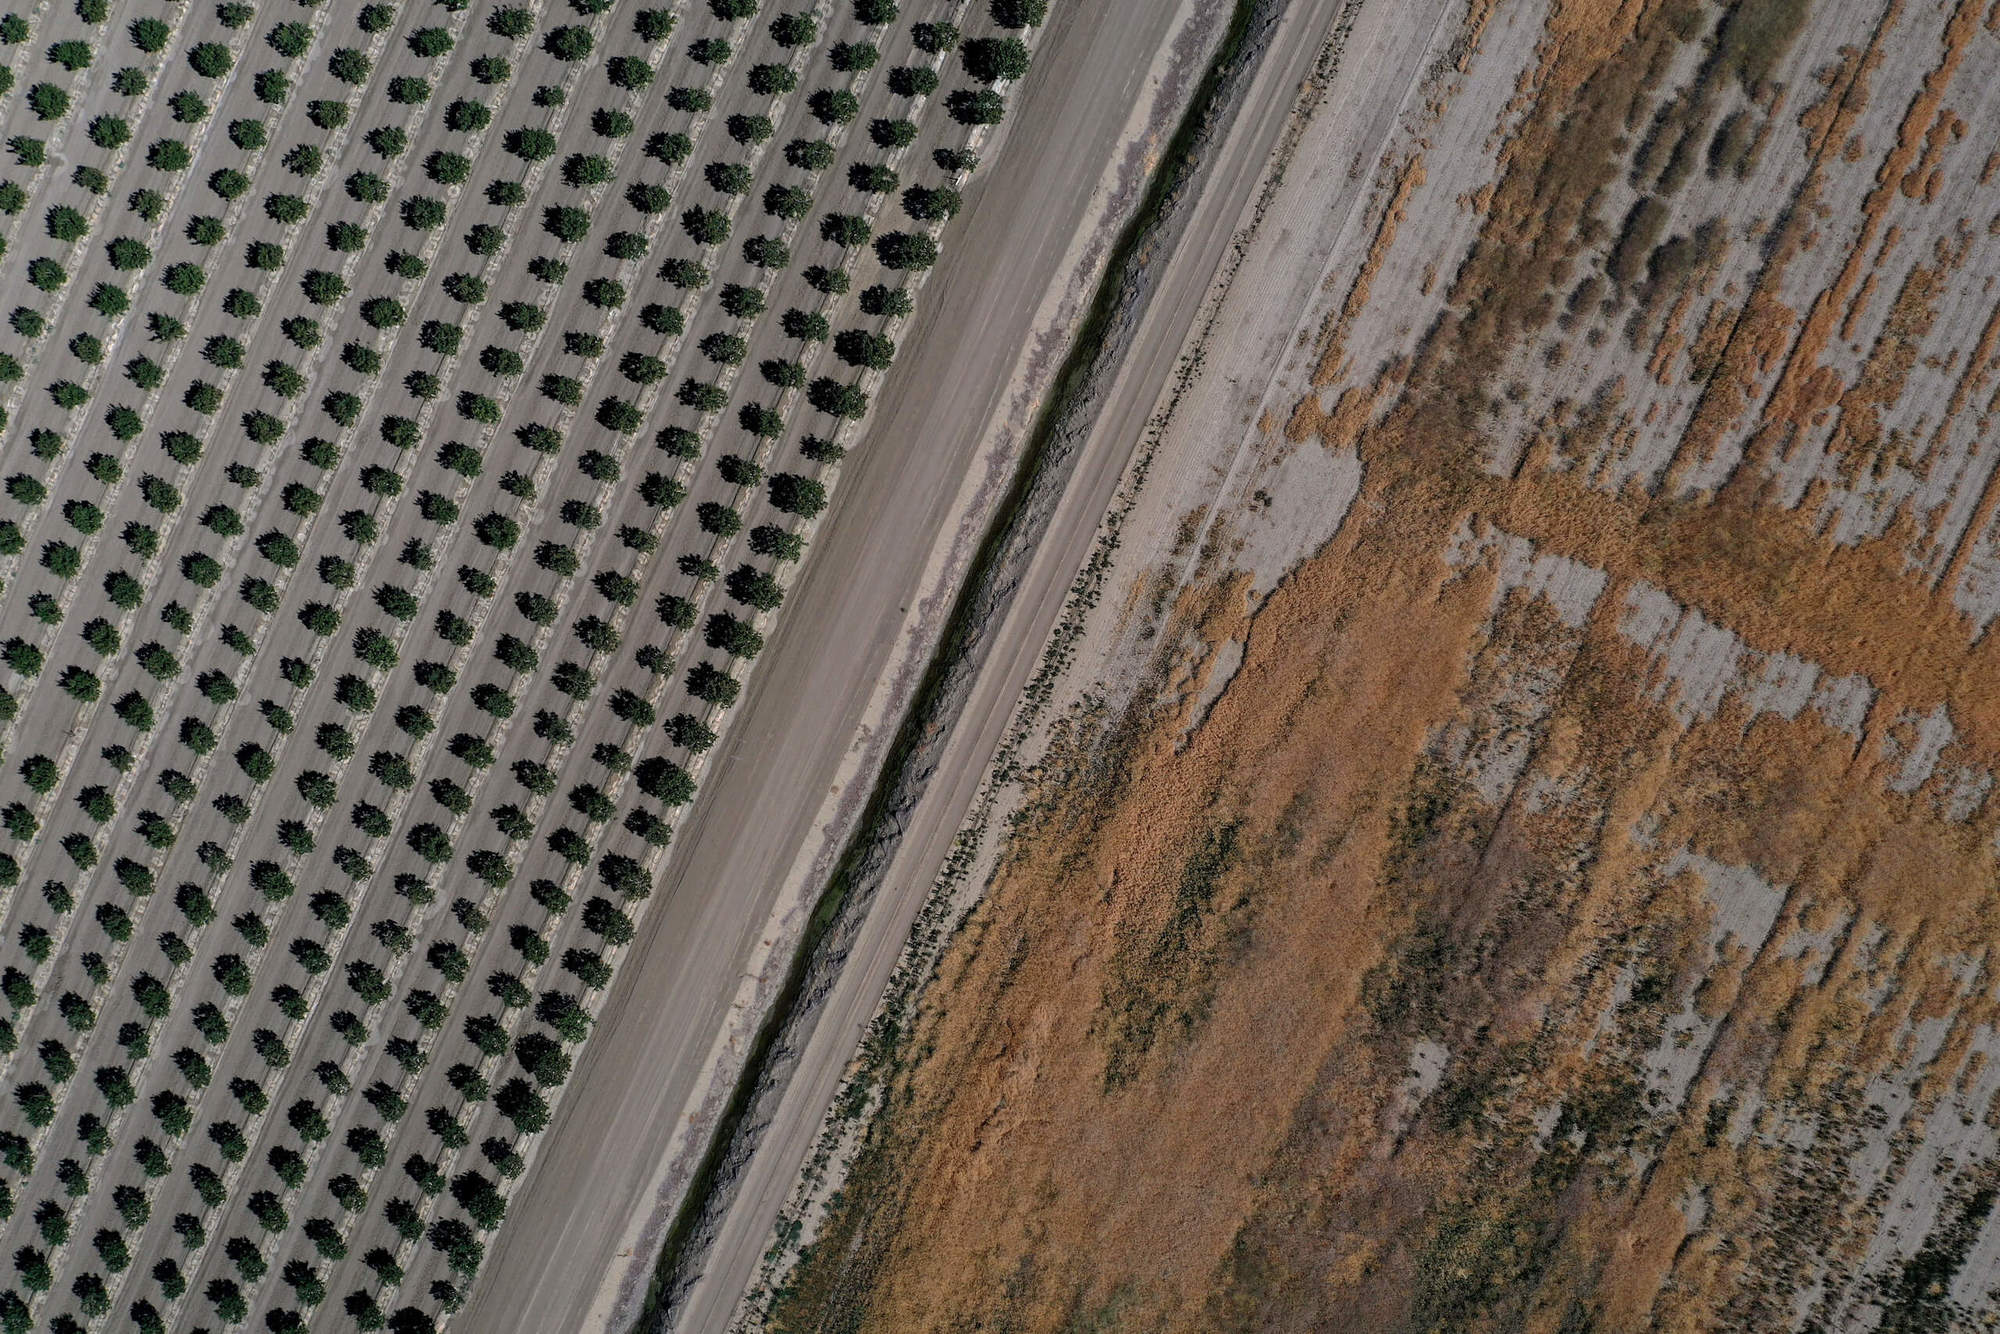 In an aerial view, an irrigation canal separates an almond orchard and a field that lies fallow on May 25, 2021 in Firebaugh, California.